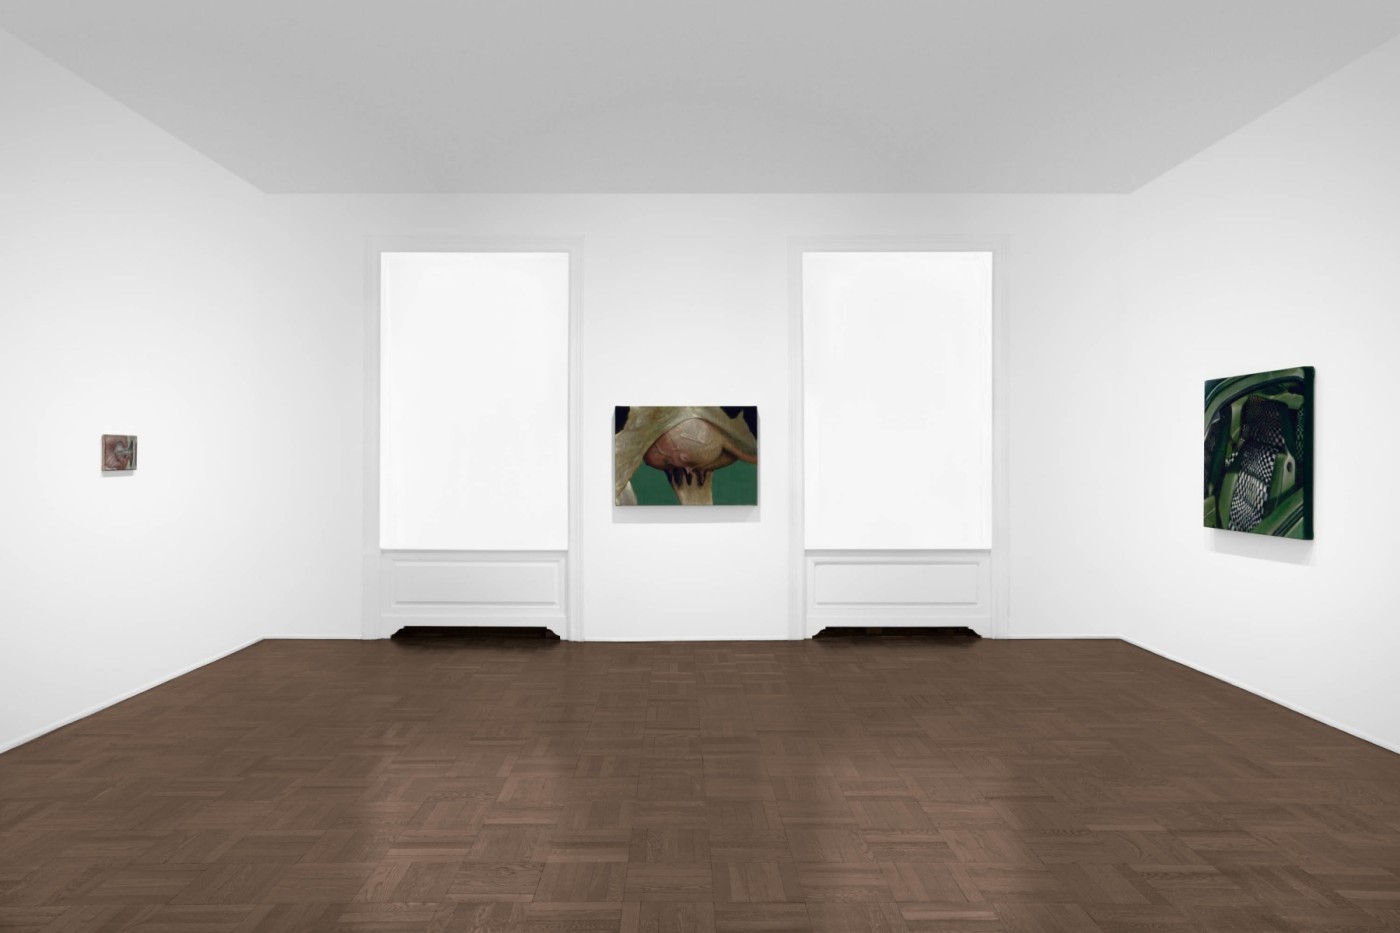 Installation image for Issy Wood: Time Sensitive, at Michael Werner Gallery